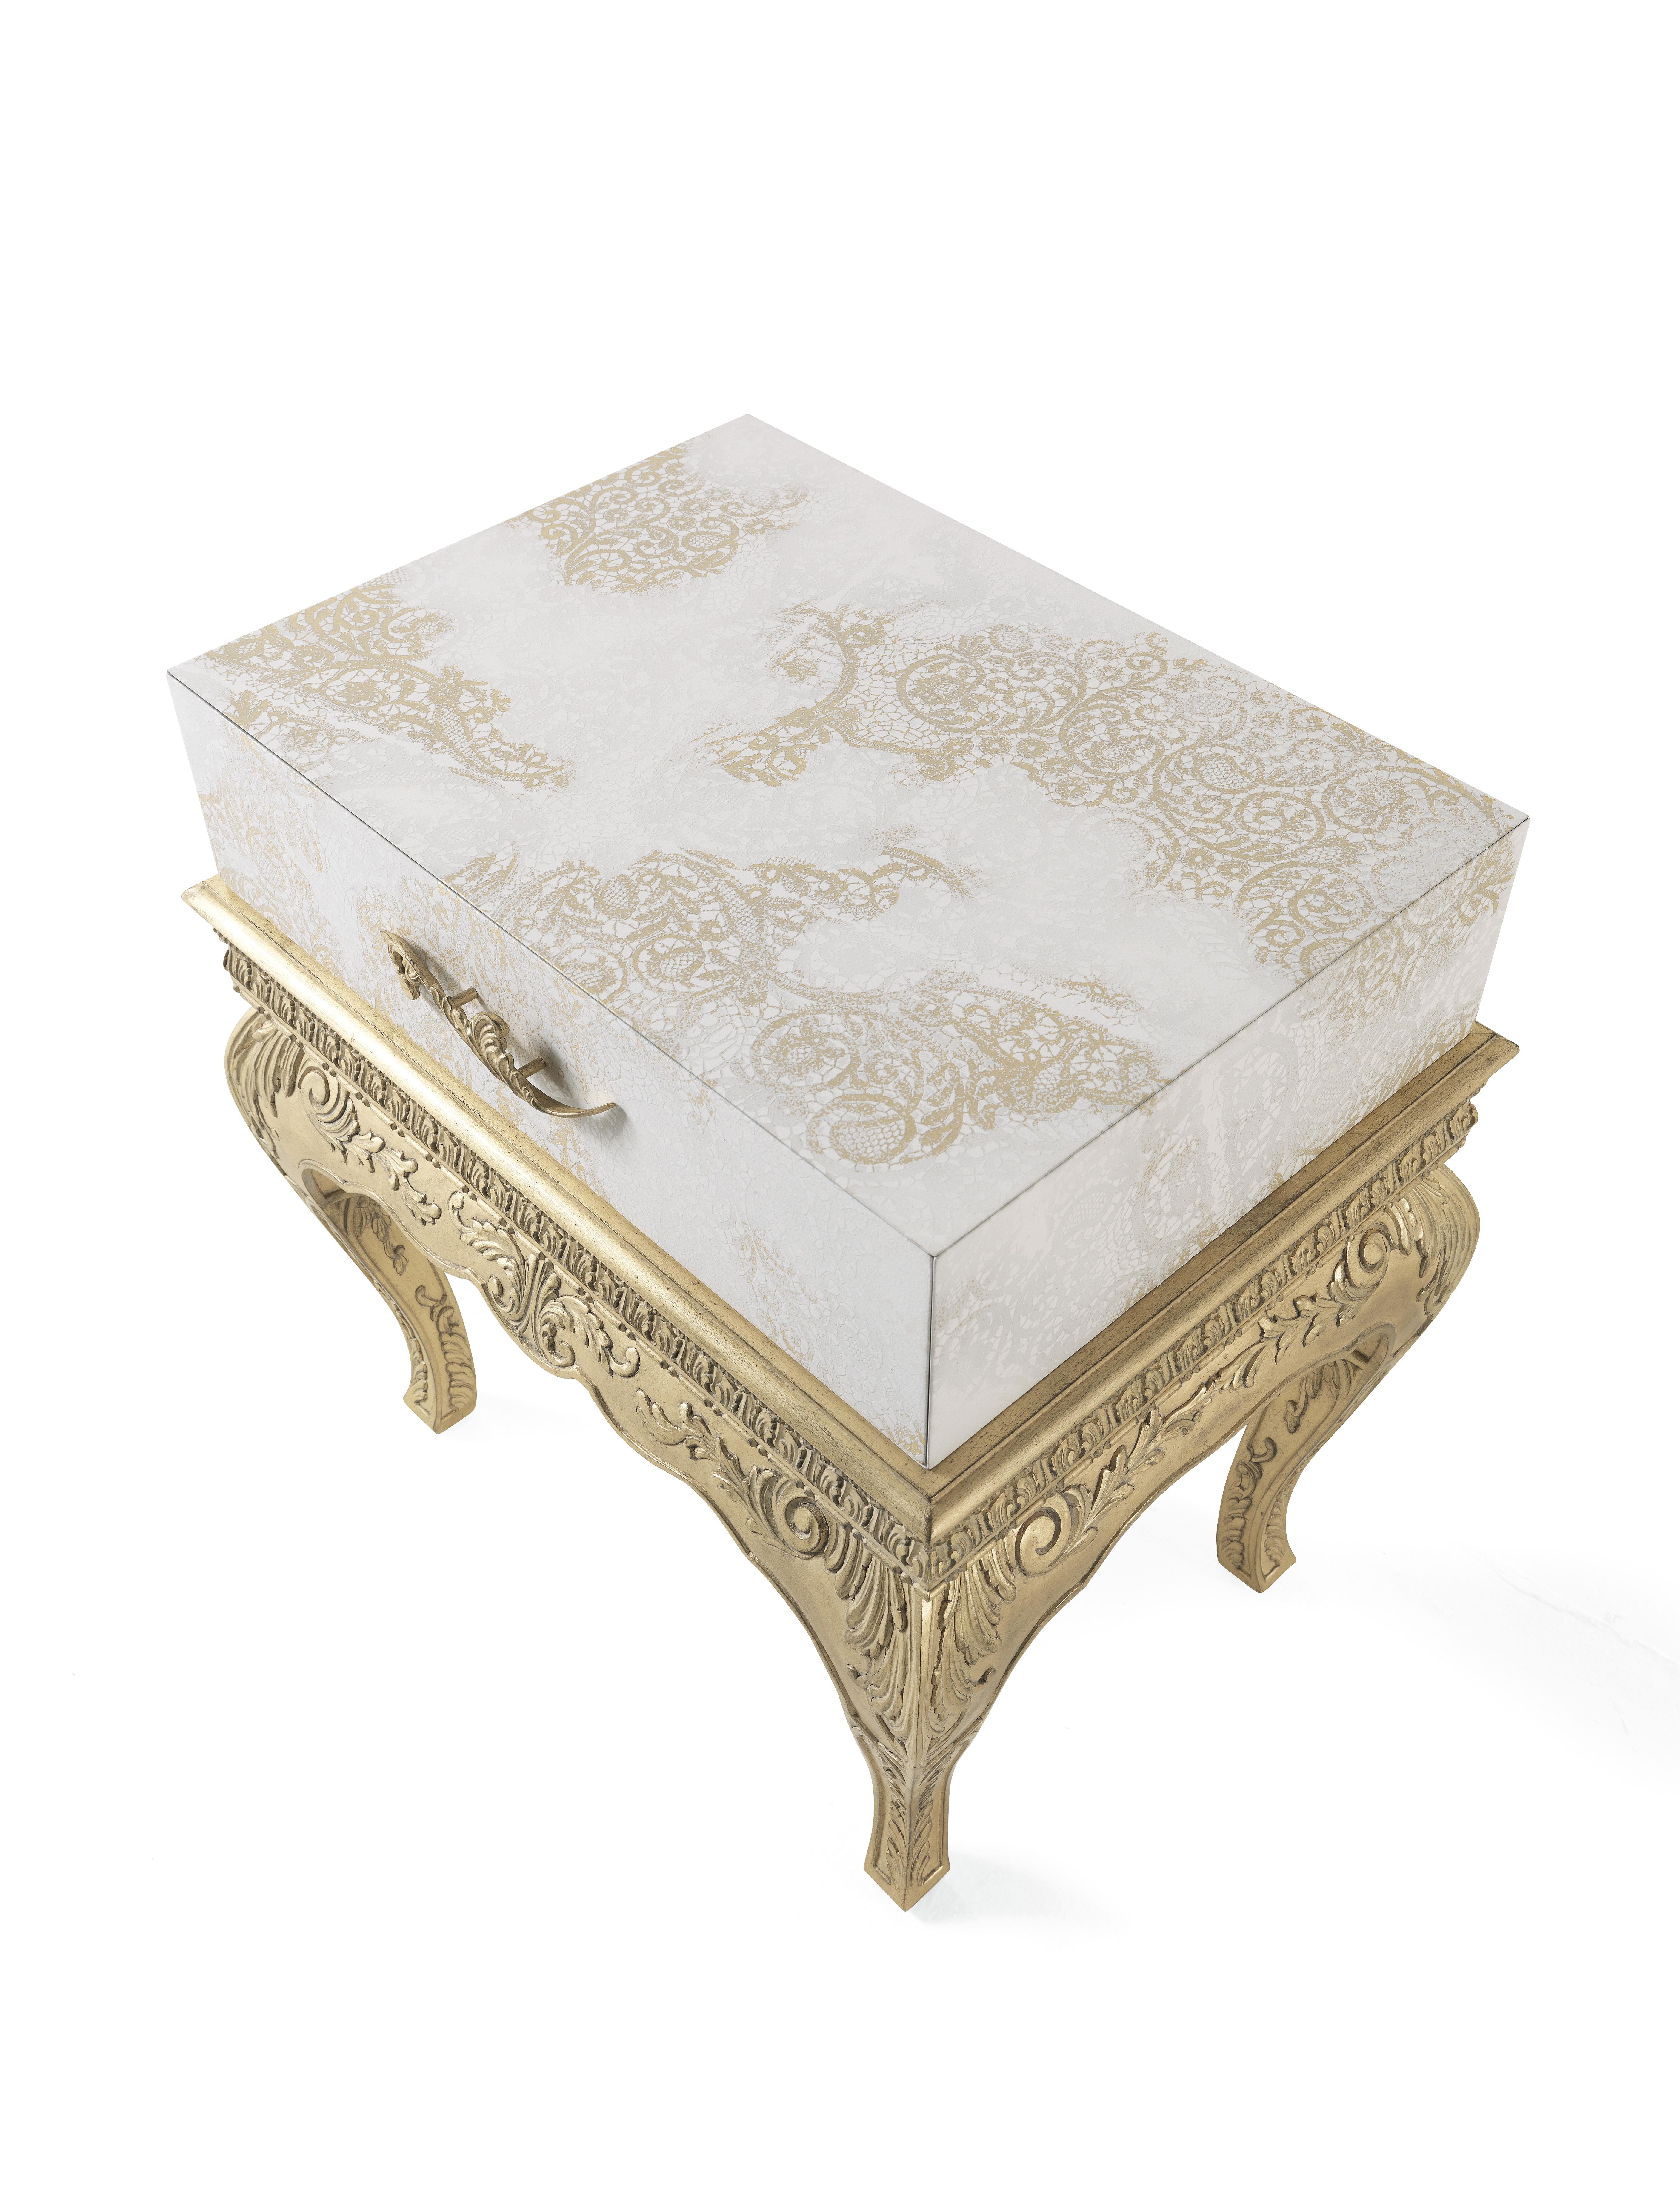 Louis XVI 21st Century Brocart Night Table with Gold Leaf Laser Engraved Lace Decoration For Sale